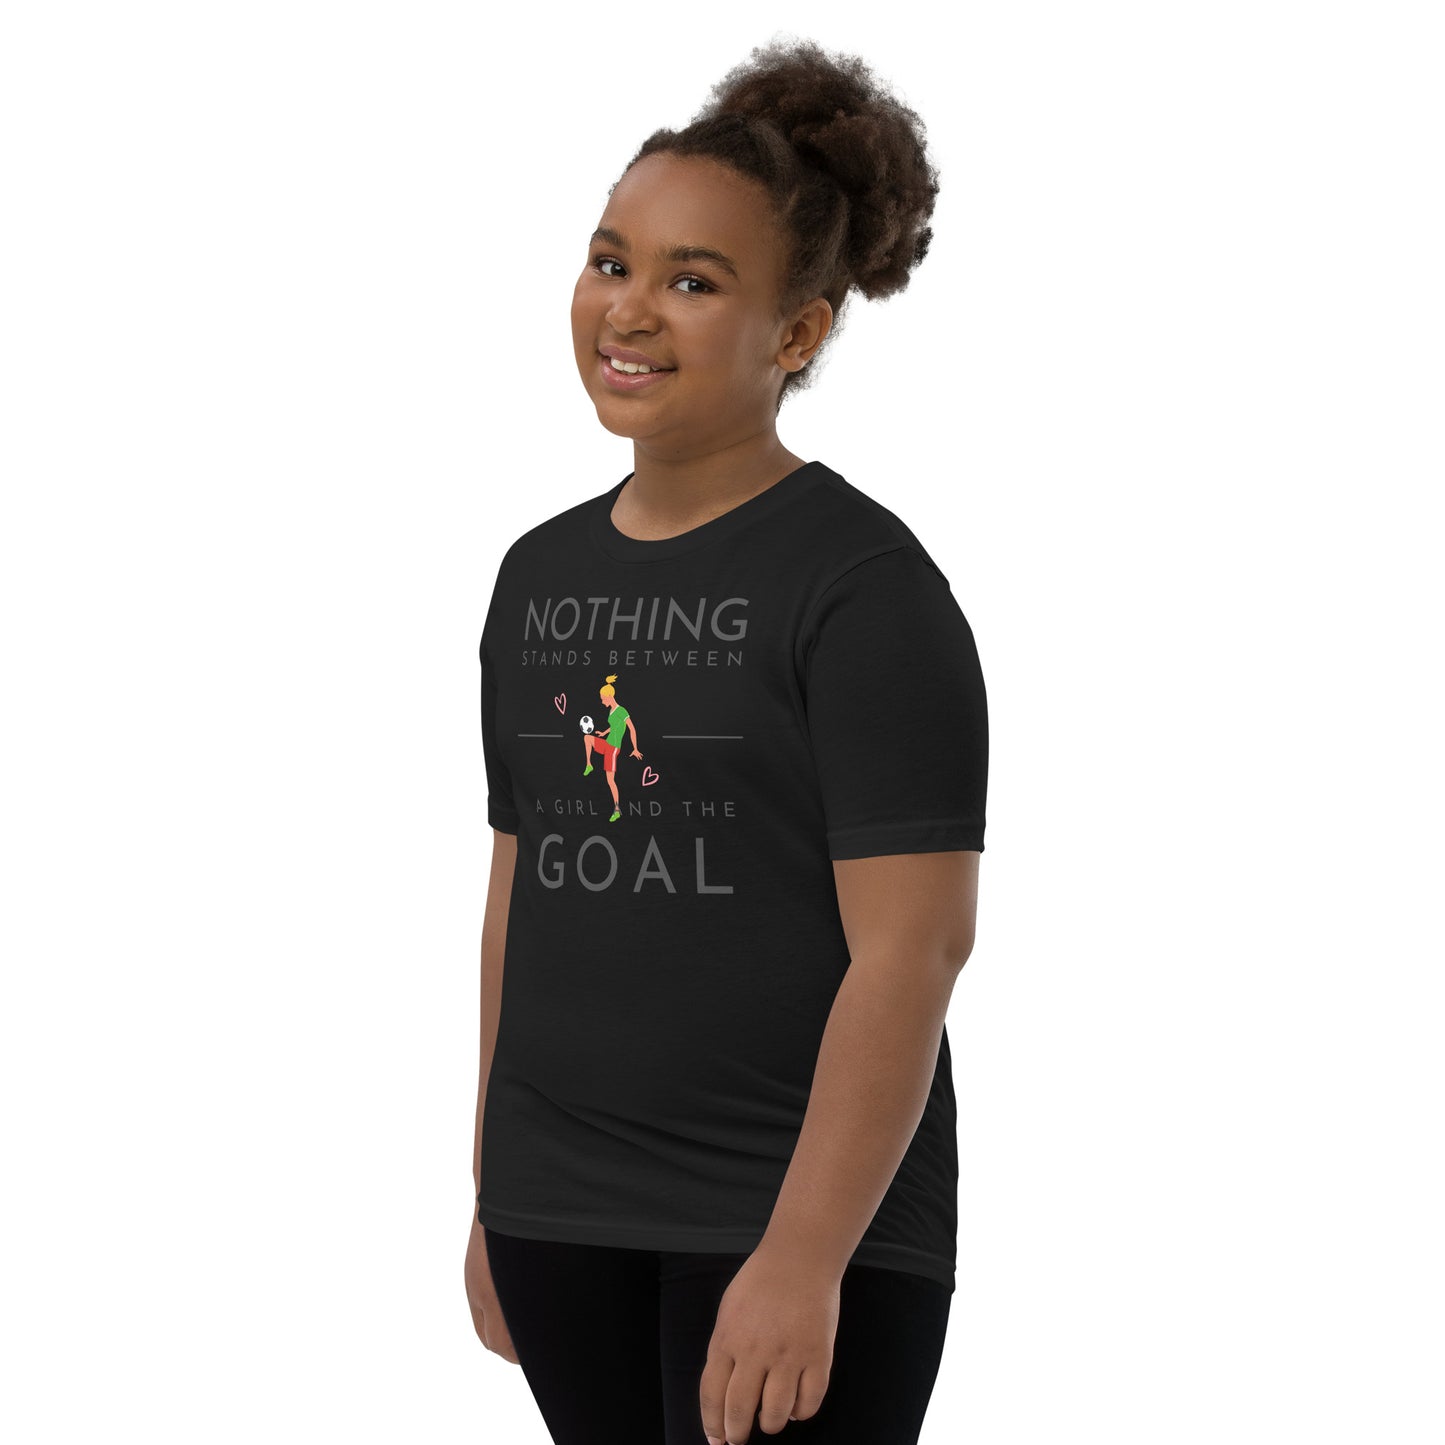 A Girl and A Goal - Youth Short Sleeve T-Shirt